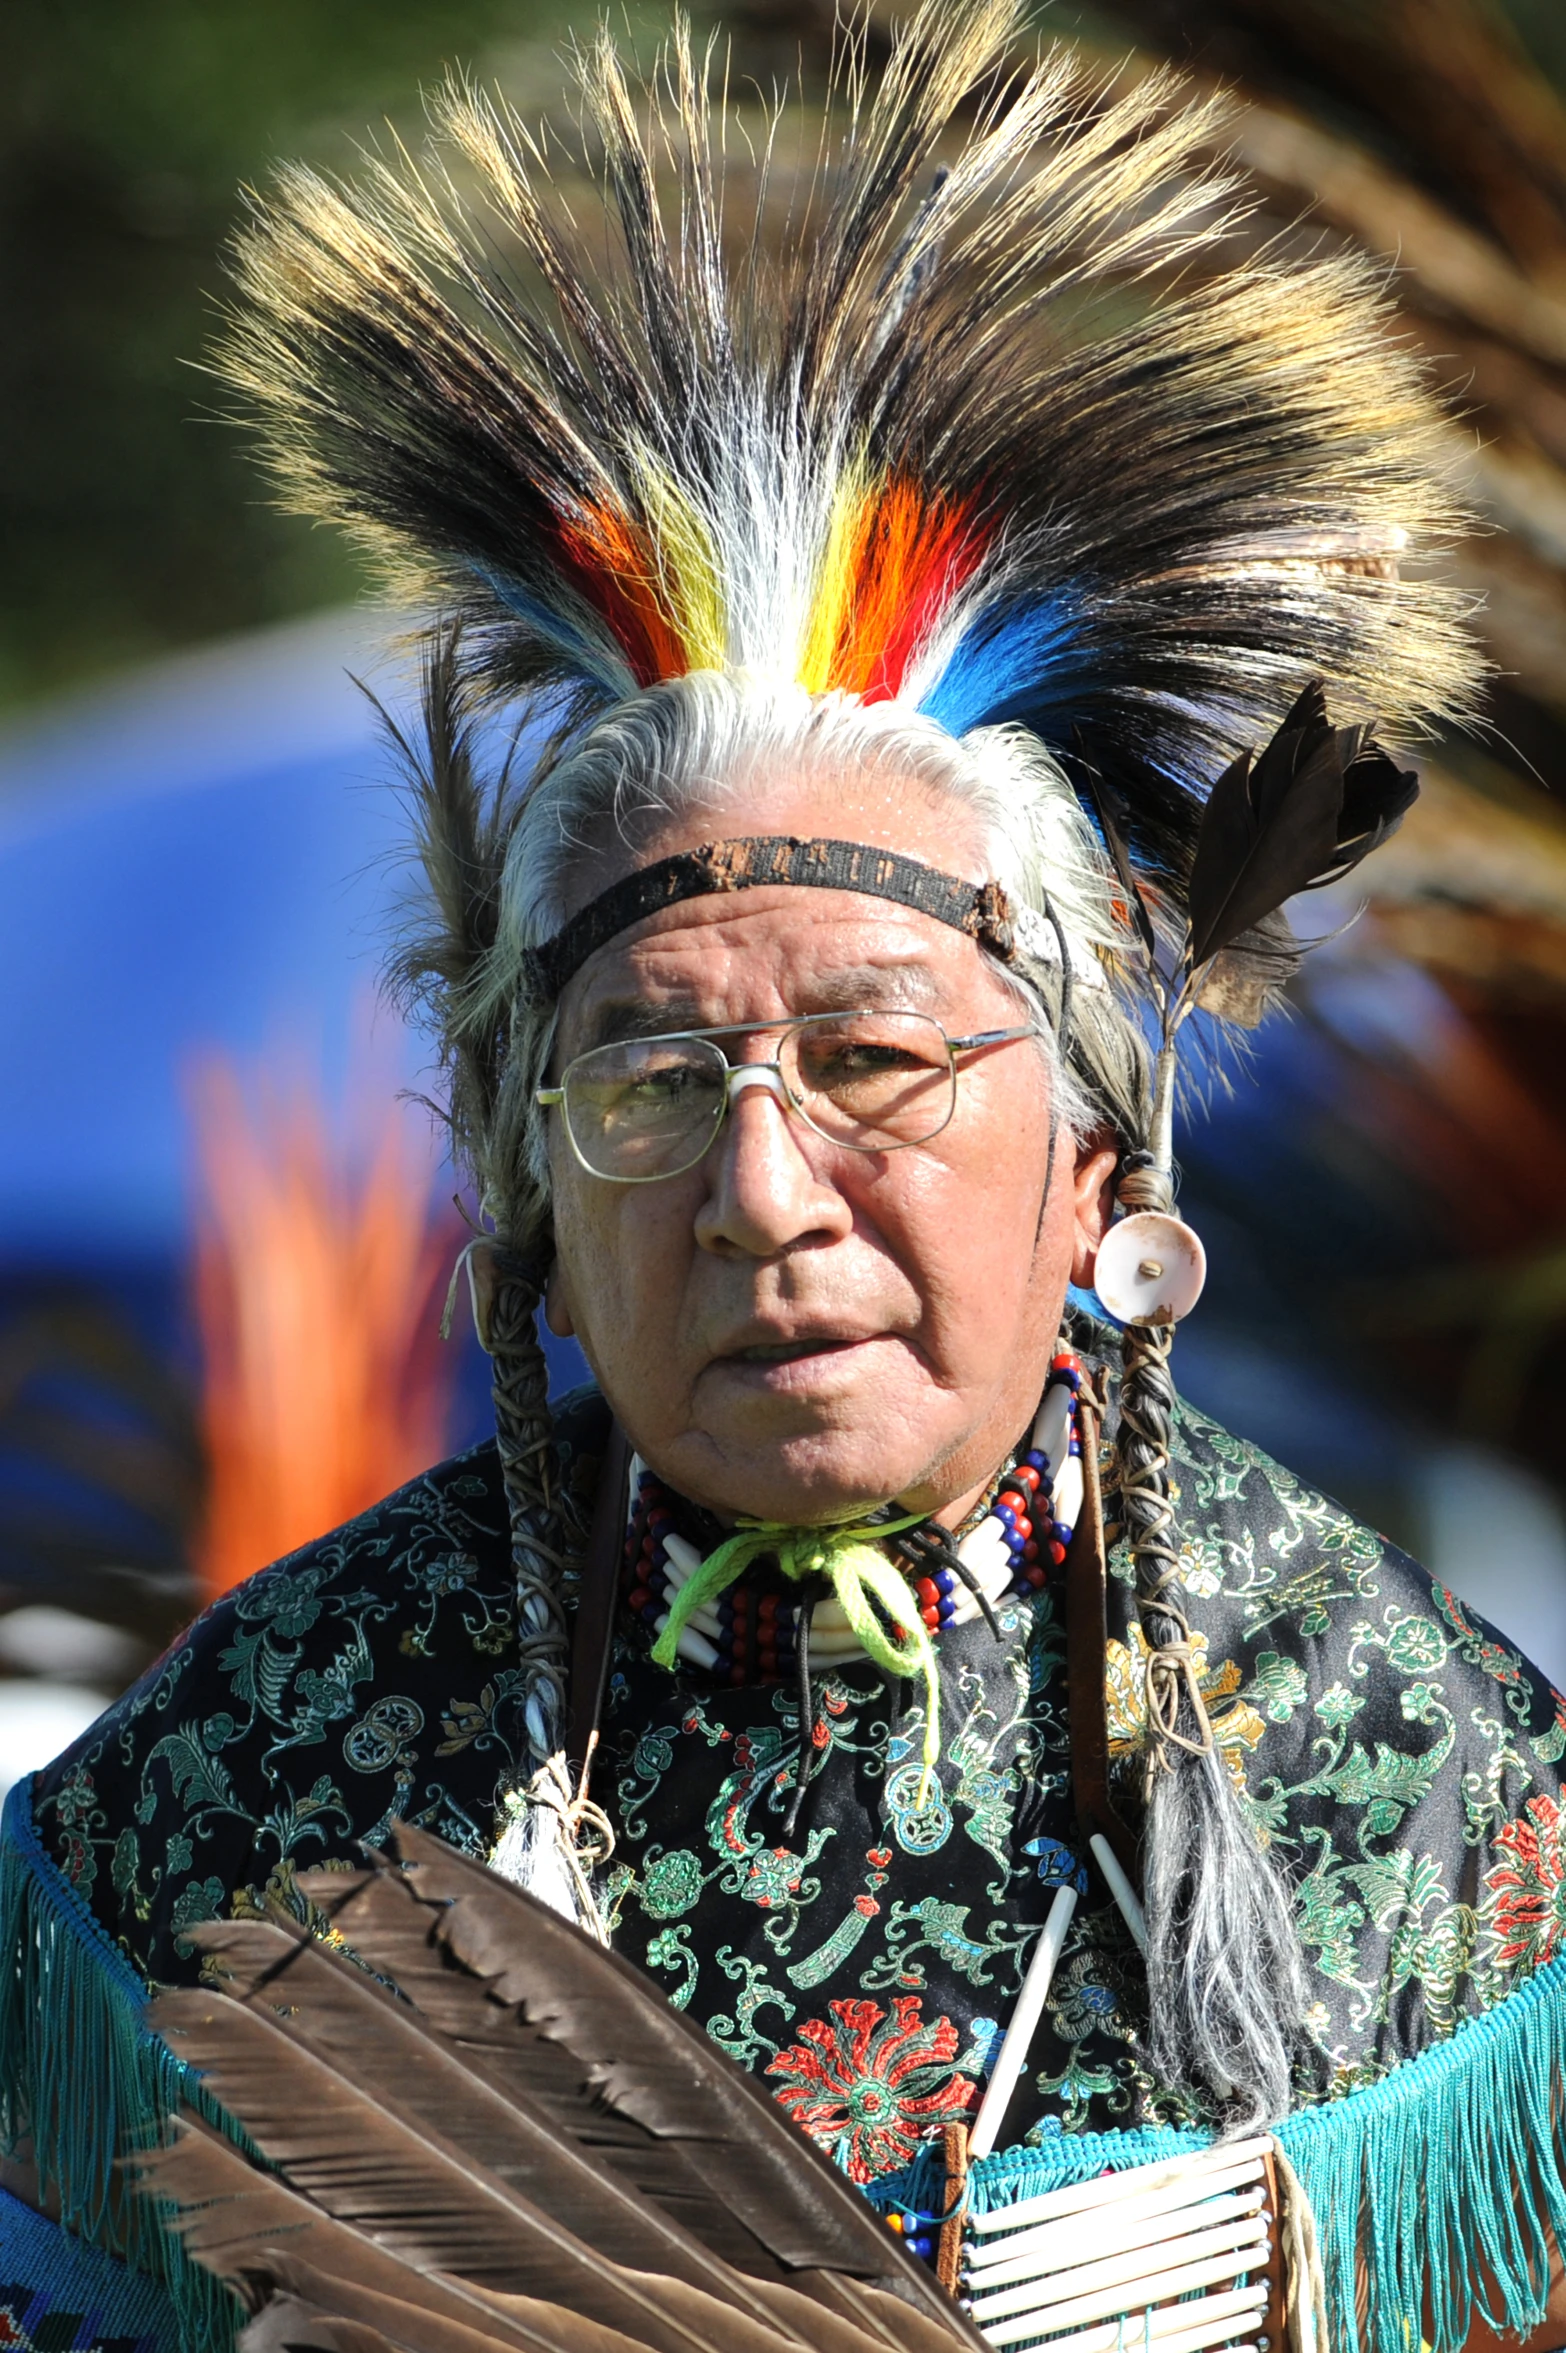 a native american indian looks at the camera